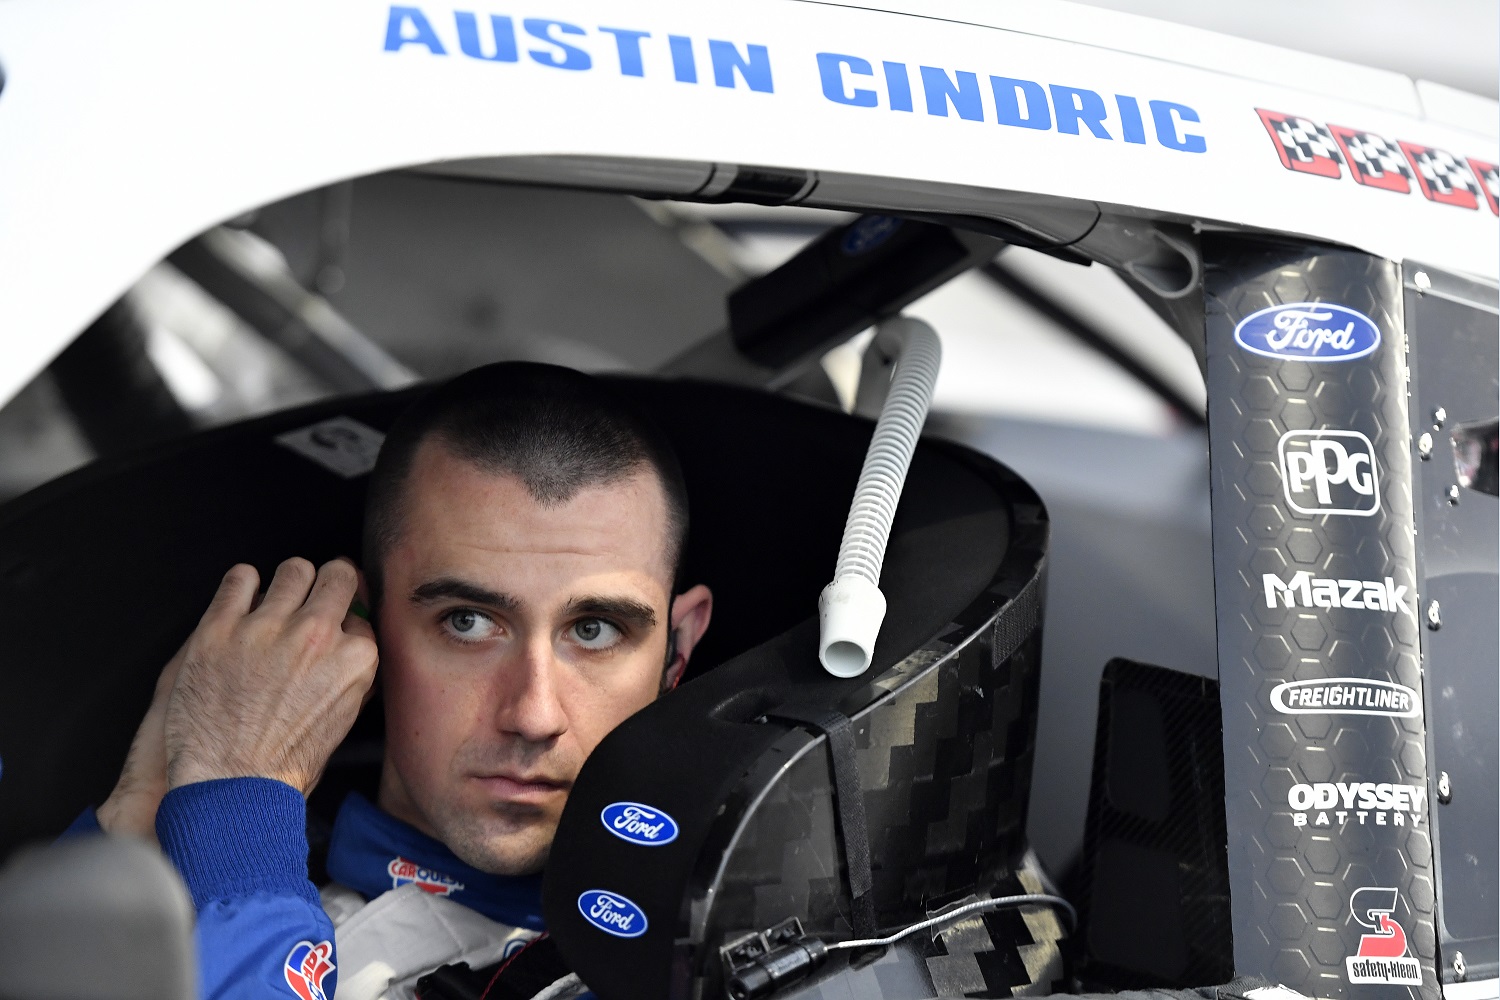 Austin Cindric prepares for the NASCAR Xfinity Series Dead on Tools 250 at Martinsville Speedway on Oct. 30, 2021 in Martinsville, Virginia. | Logan Riely/Getty Images